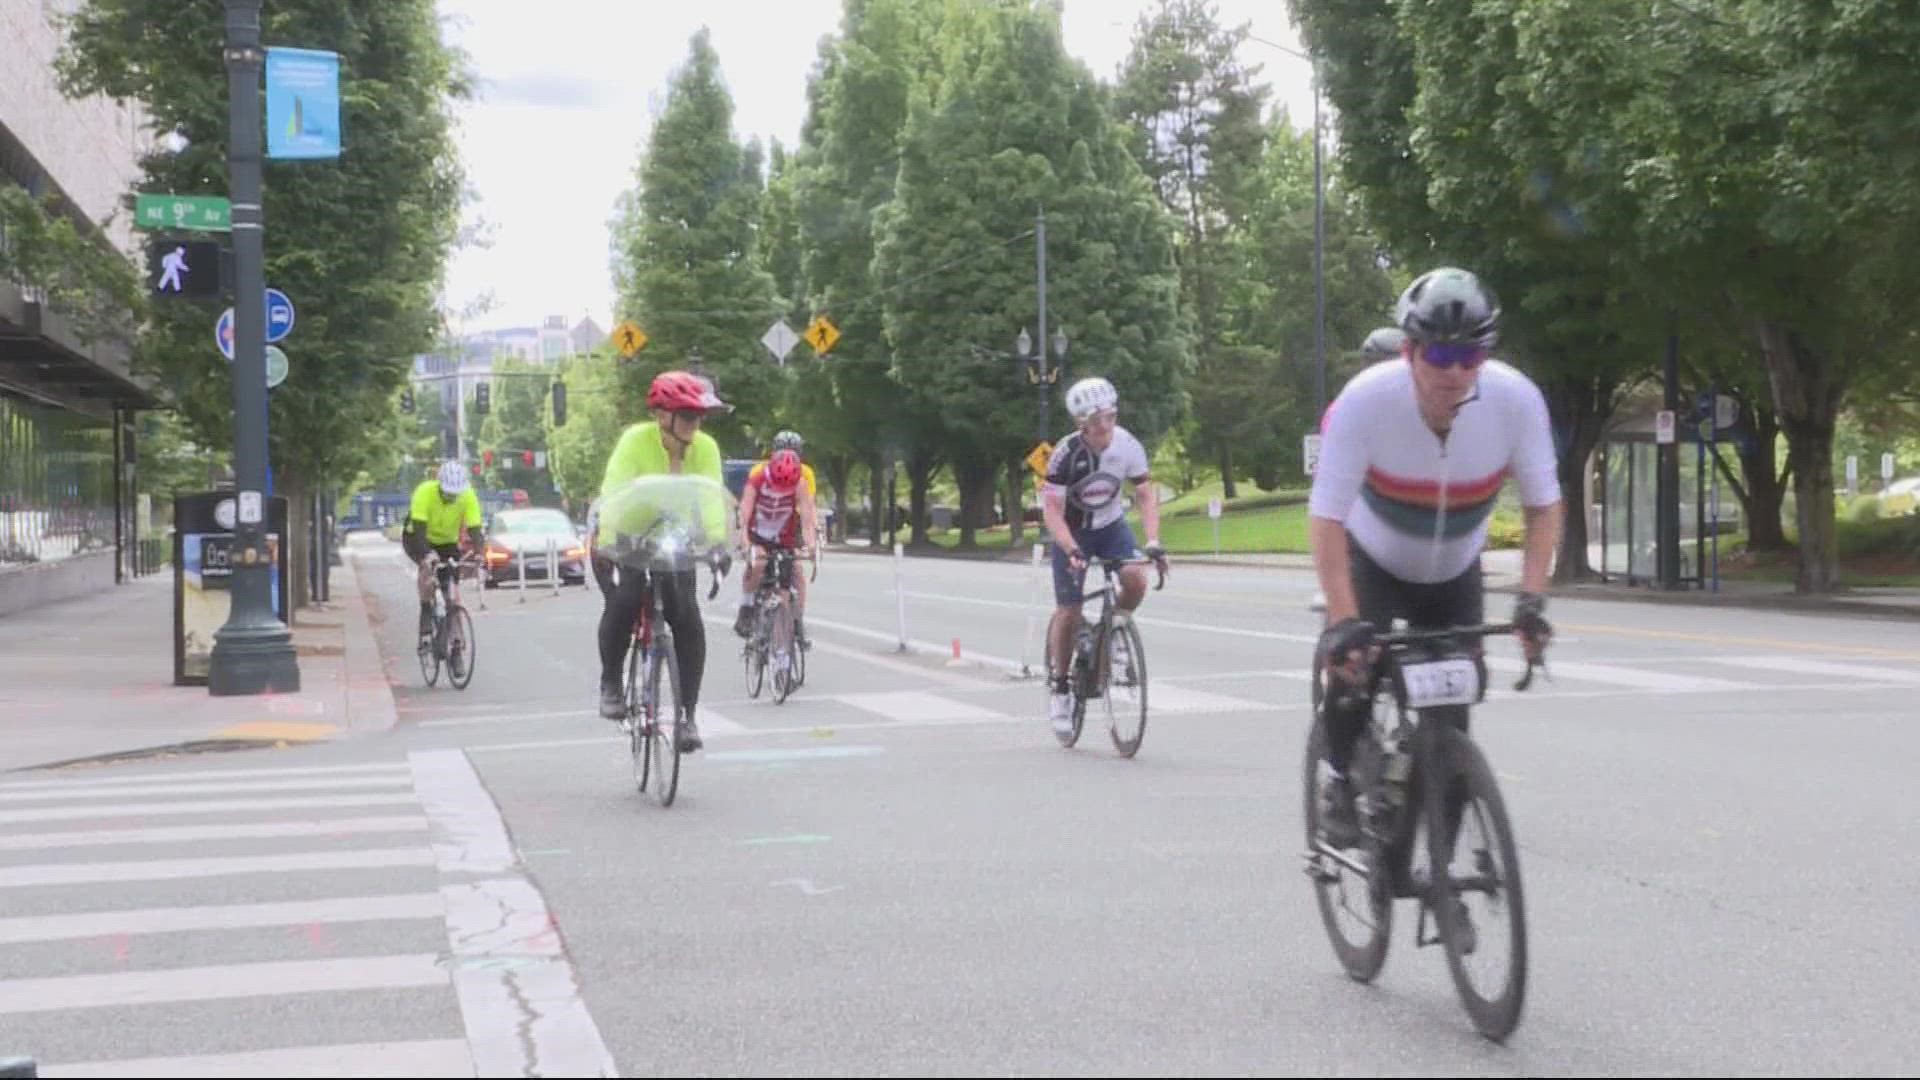 Nearly 6,000 cyclists are registered for the more than 200-mile ride. The first group of riders reached Portland on Saturday.